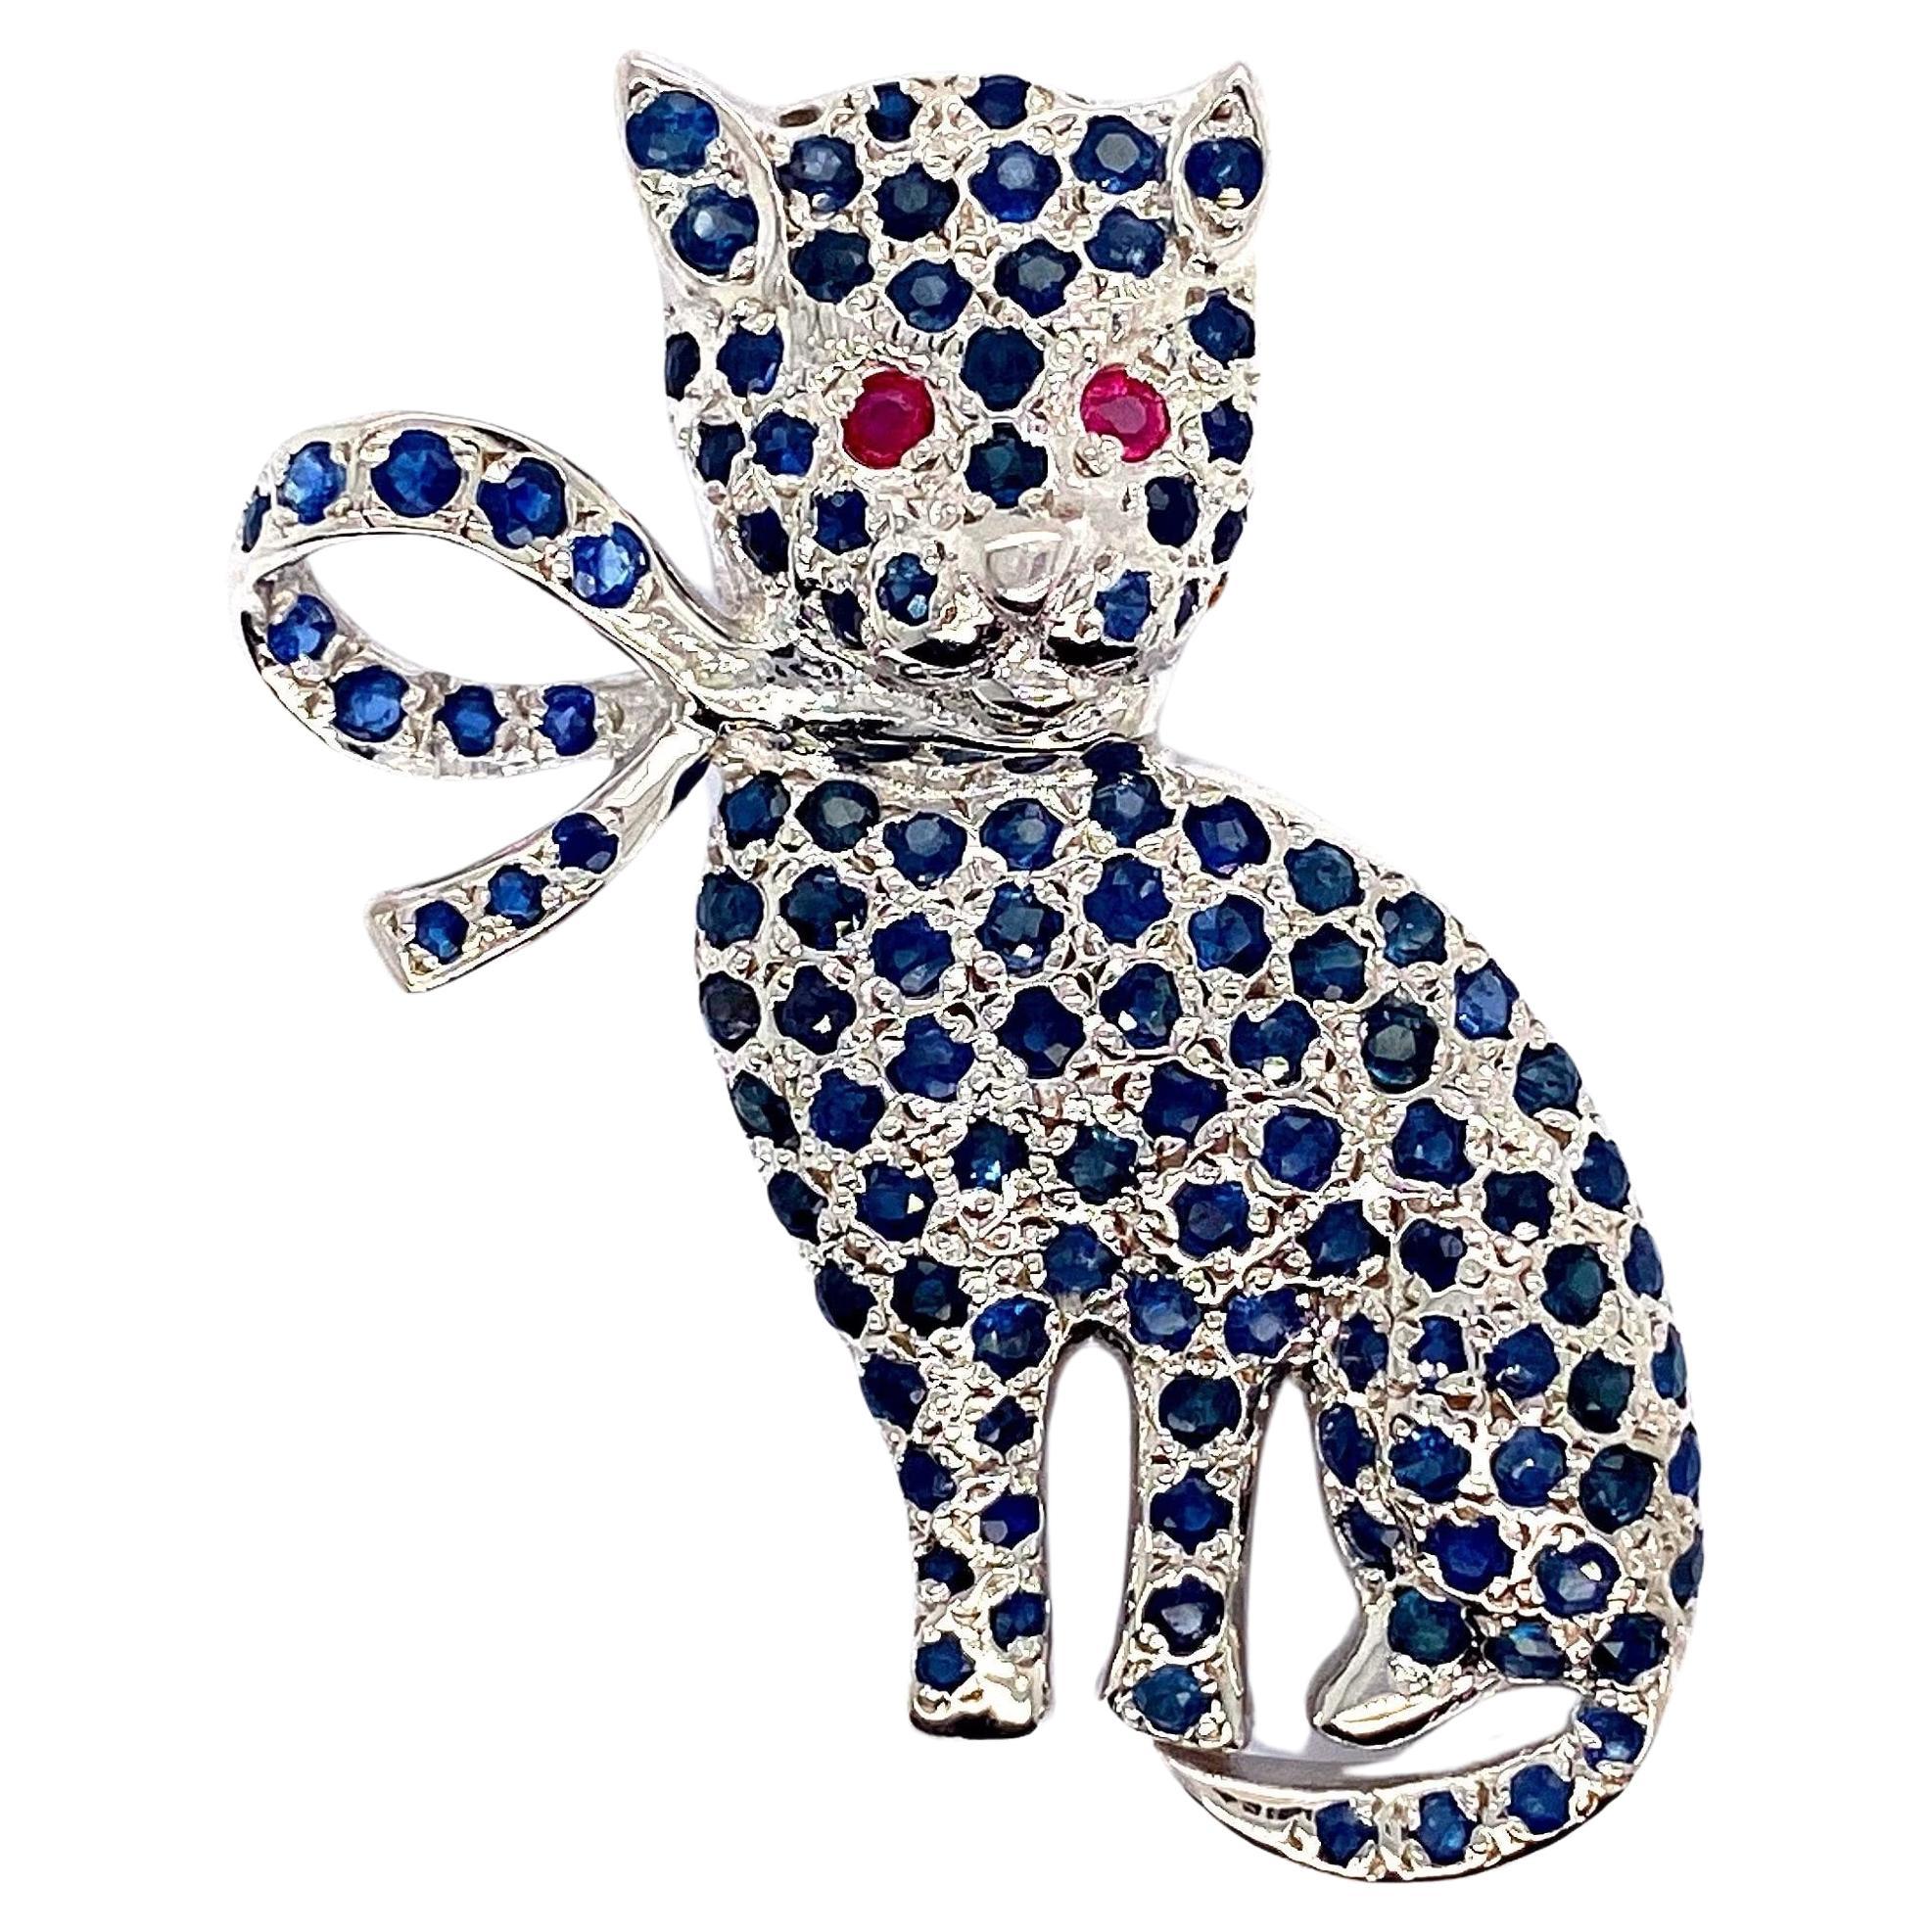 Unique Ruby and Sapphire Cat Sterling Silver Brooch Gift